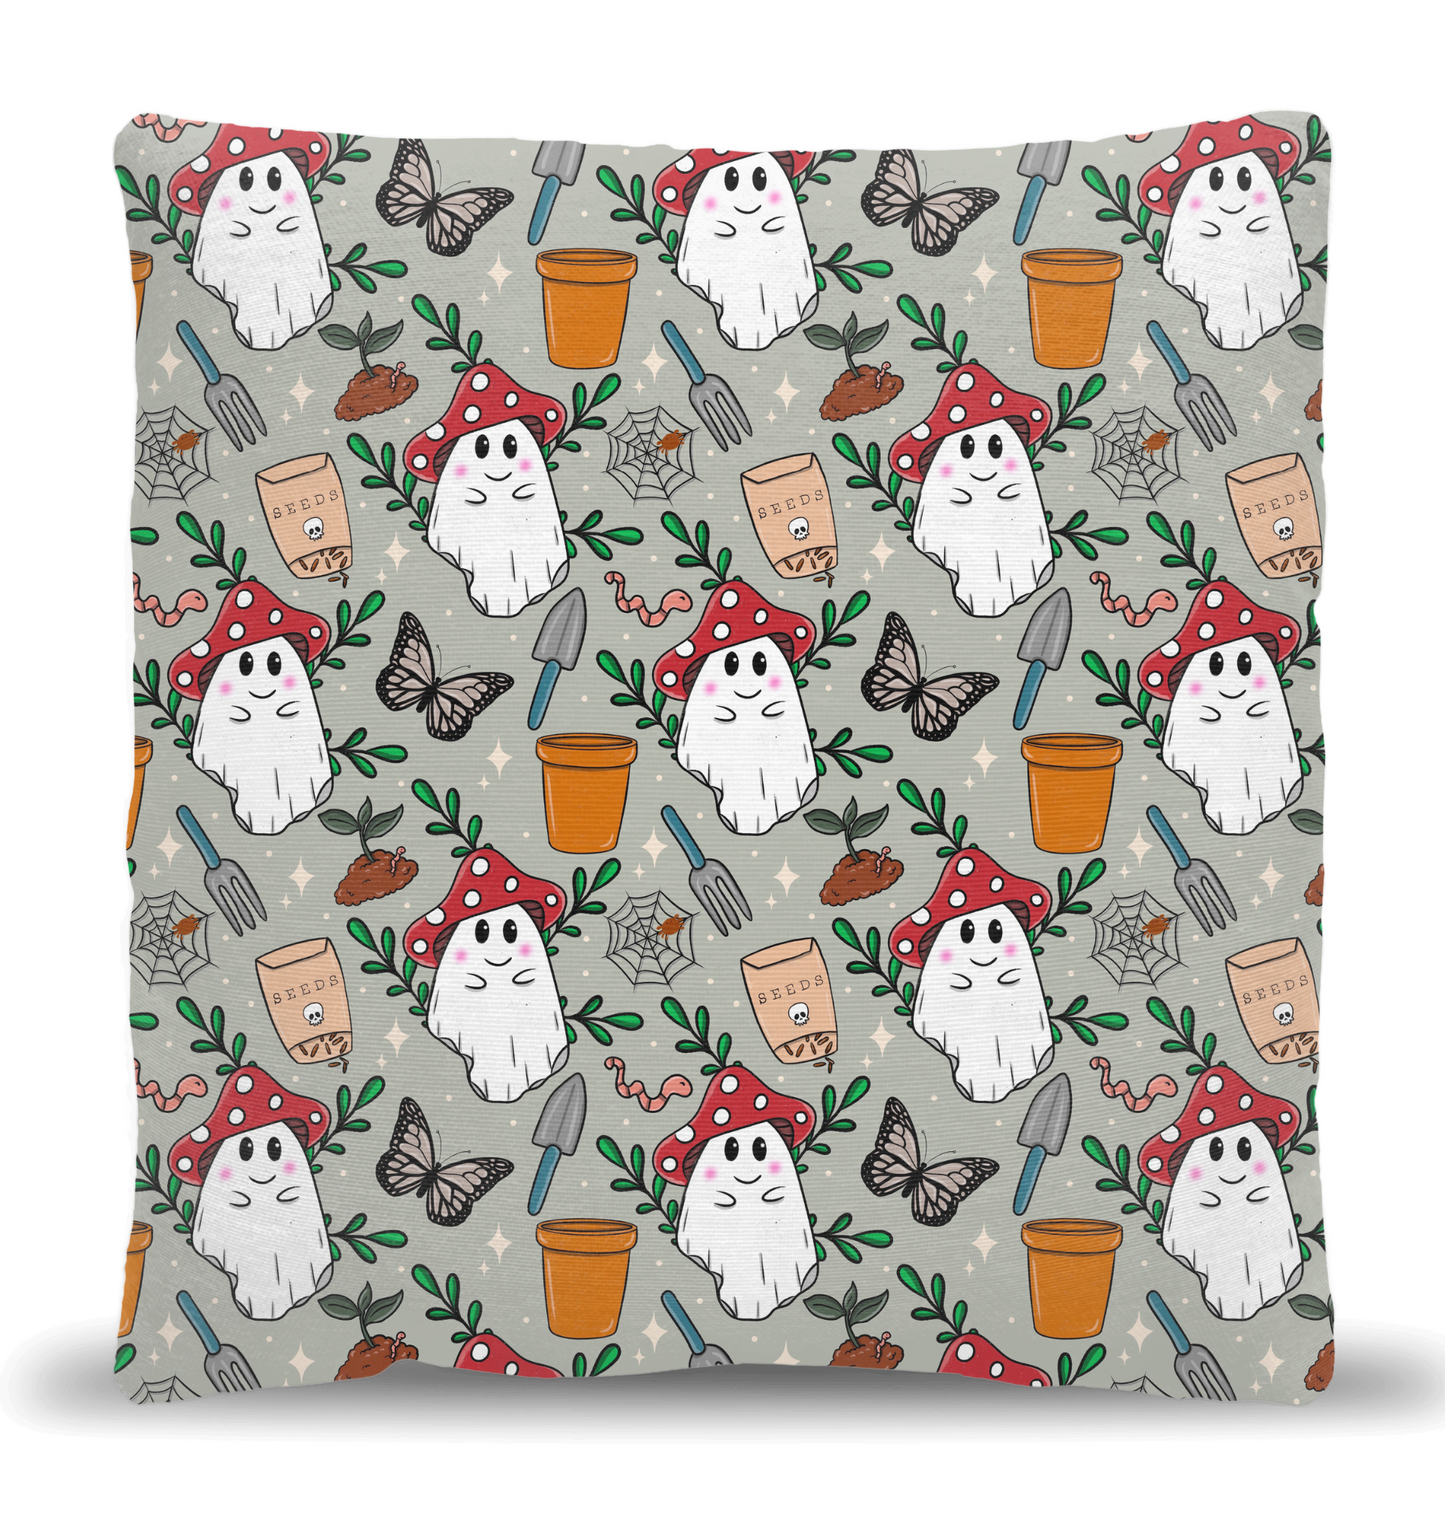 Ghost with mushroom hat woven pillow 18x17”